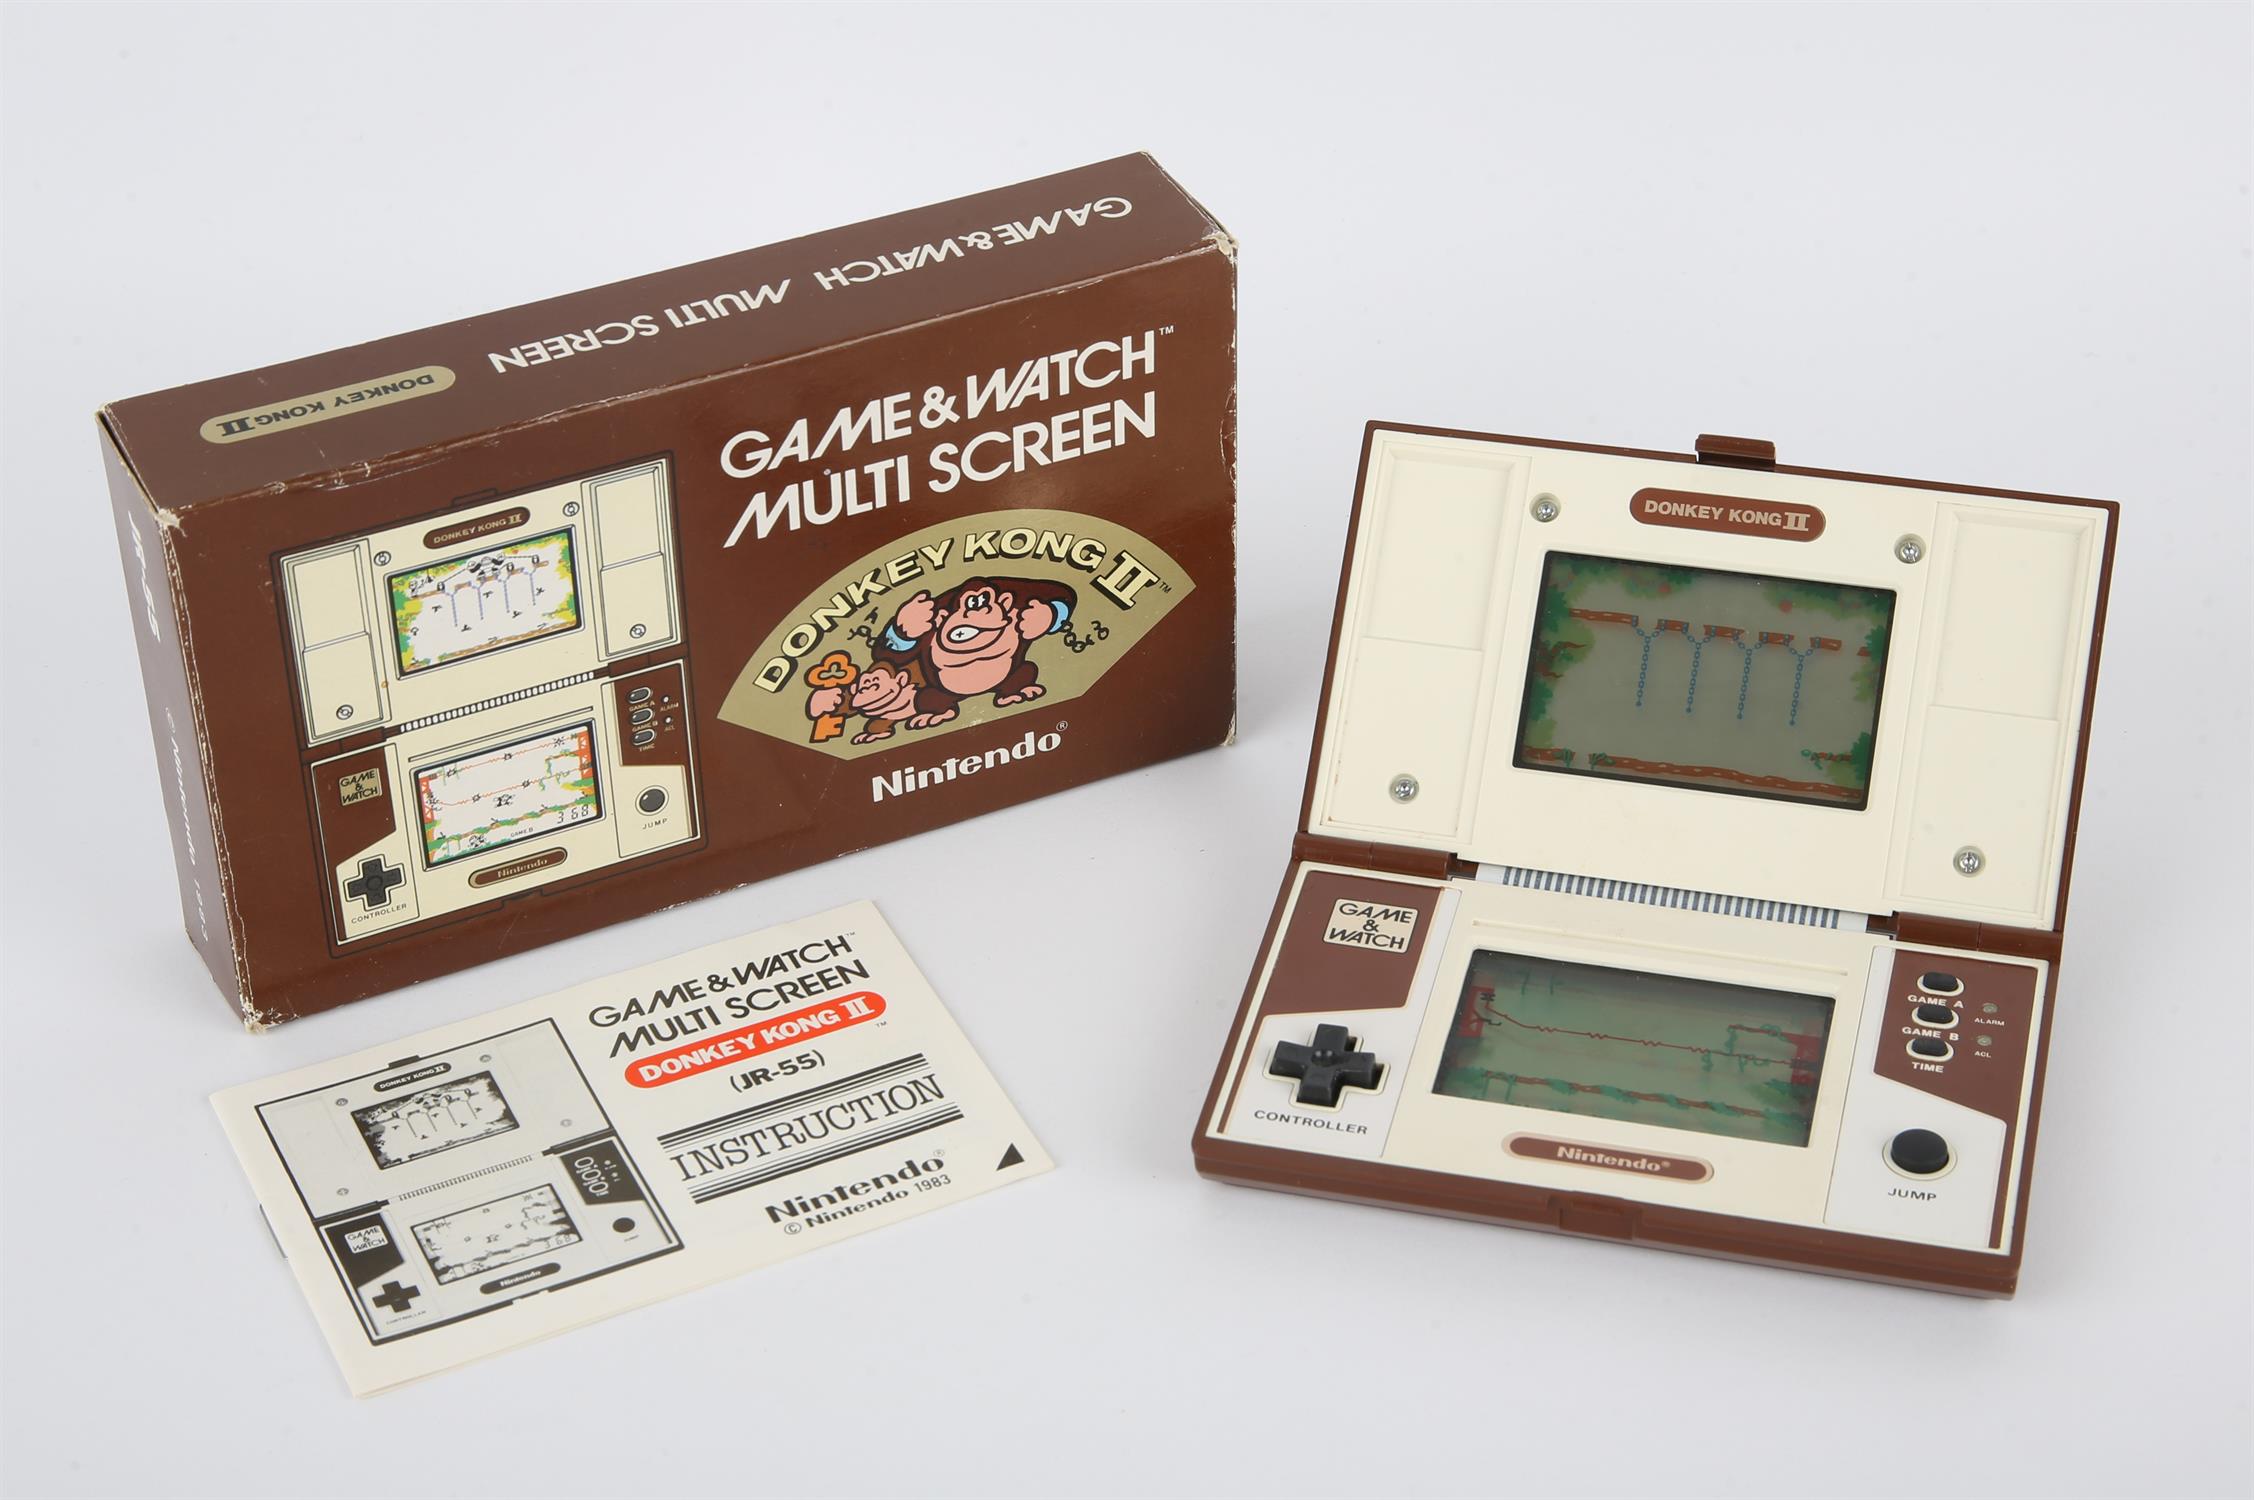 Nintendo Game & Watch Donkey Kong II [JR-55] handheld console from 1983 (complete and boxed) Item